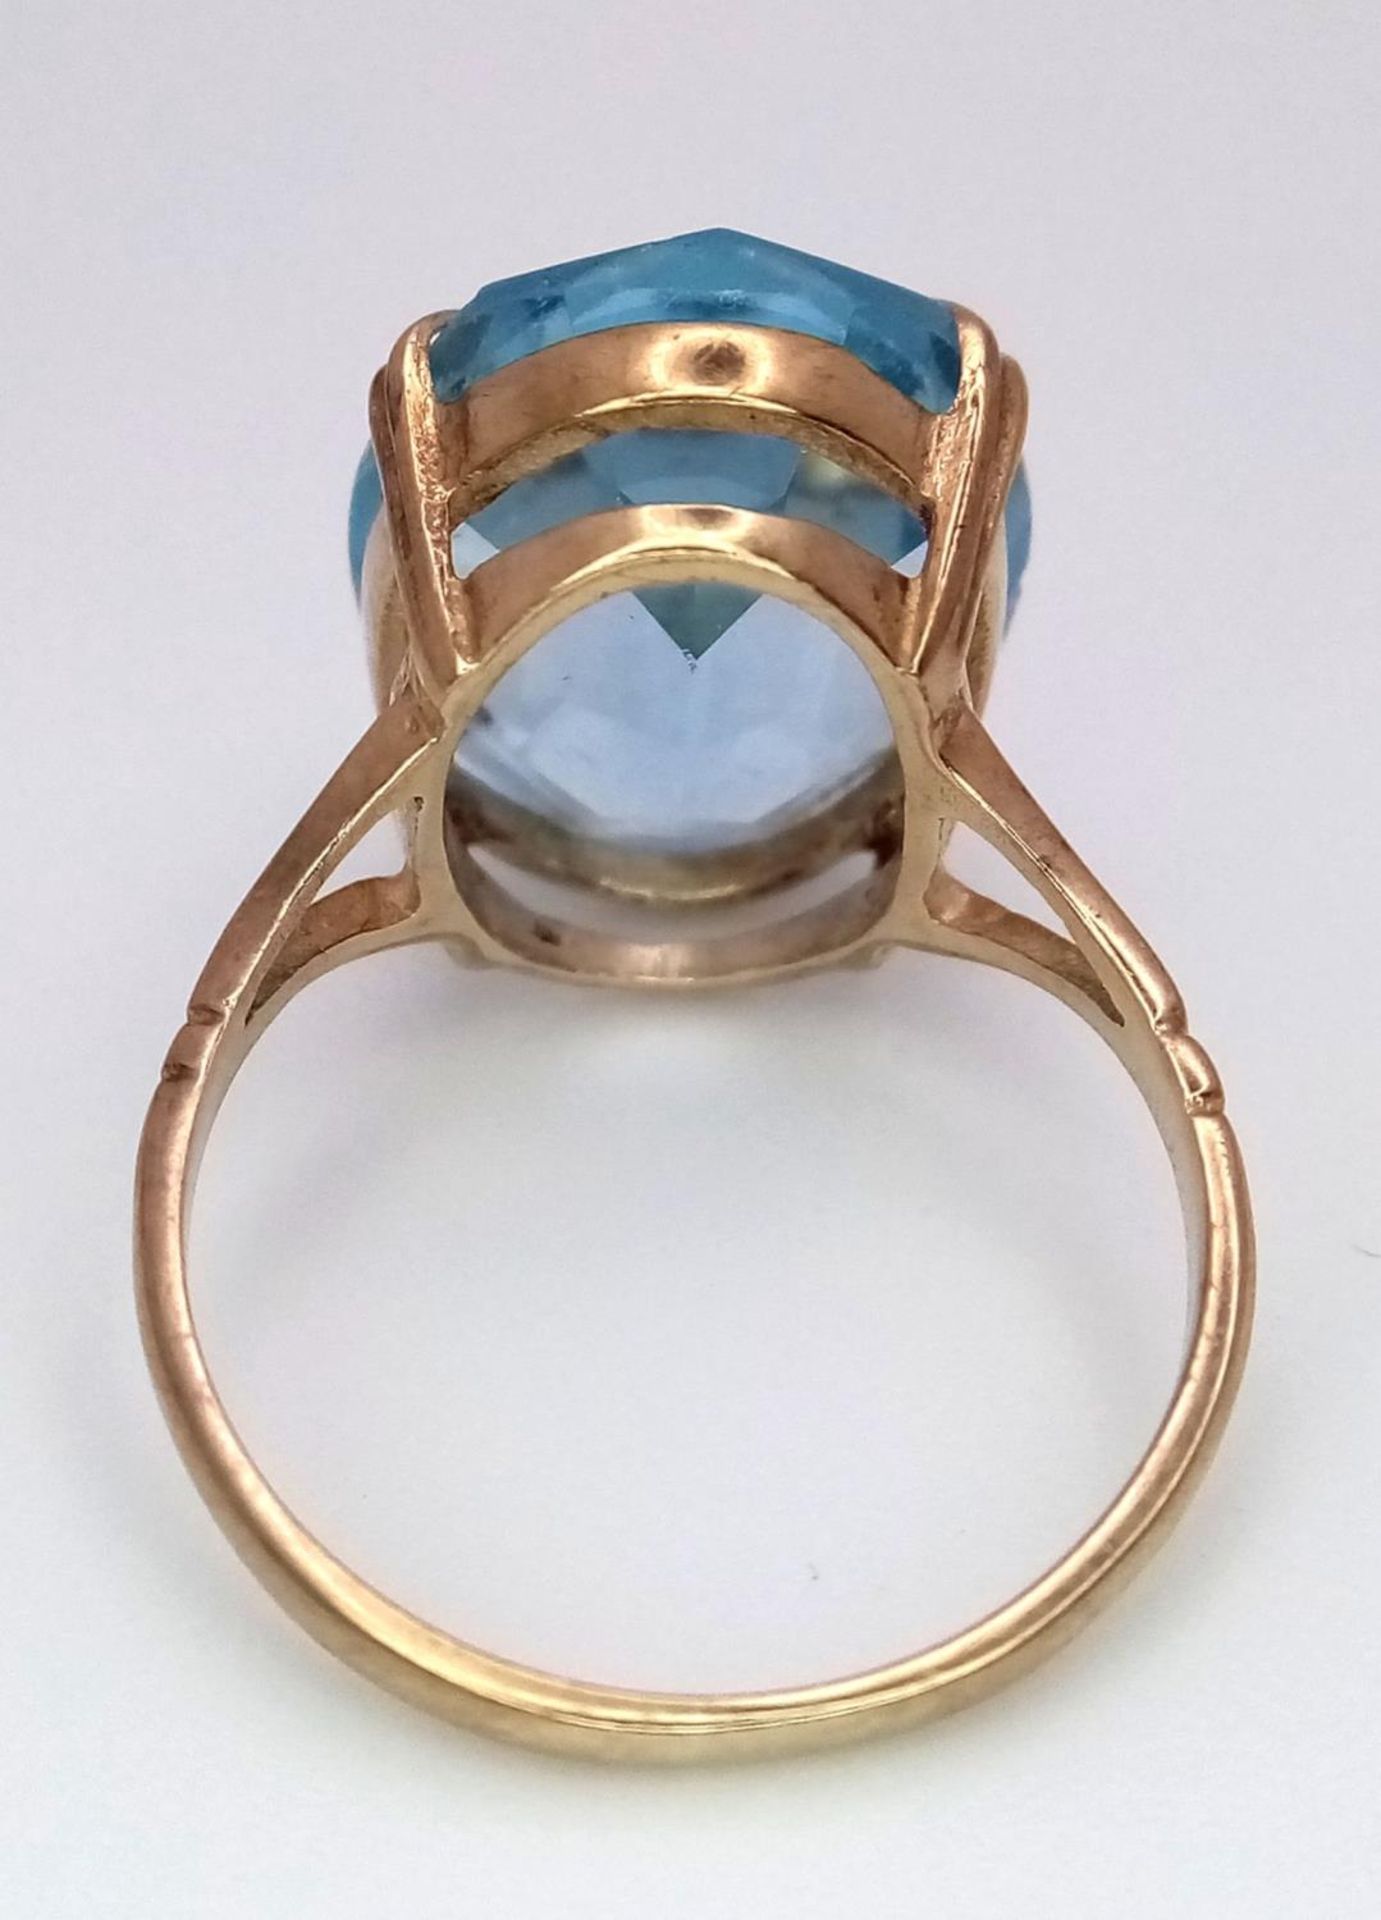 A 9ct Yellow Gold Blue Topaz Ring, 12mmx18mm topaz, size M, 4.1g total weight. ref: 1500I - Image 4 of 5